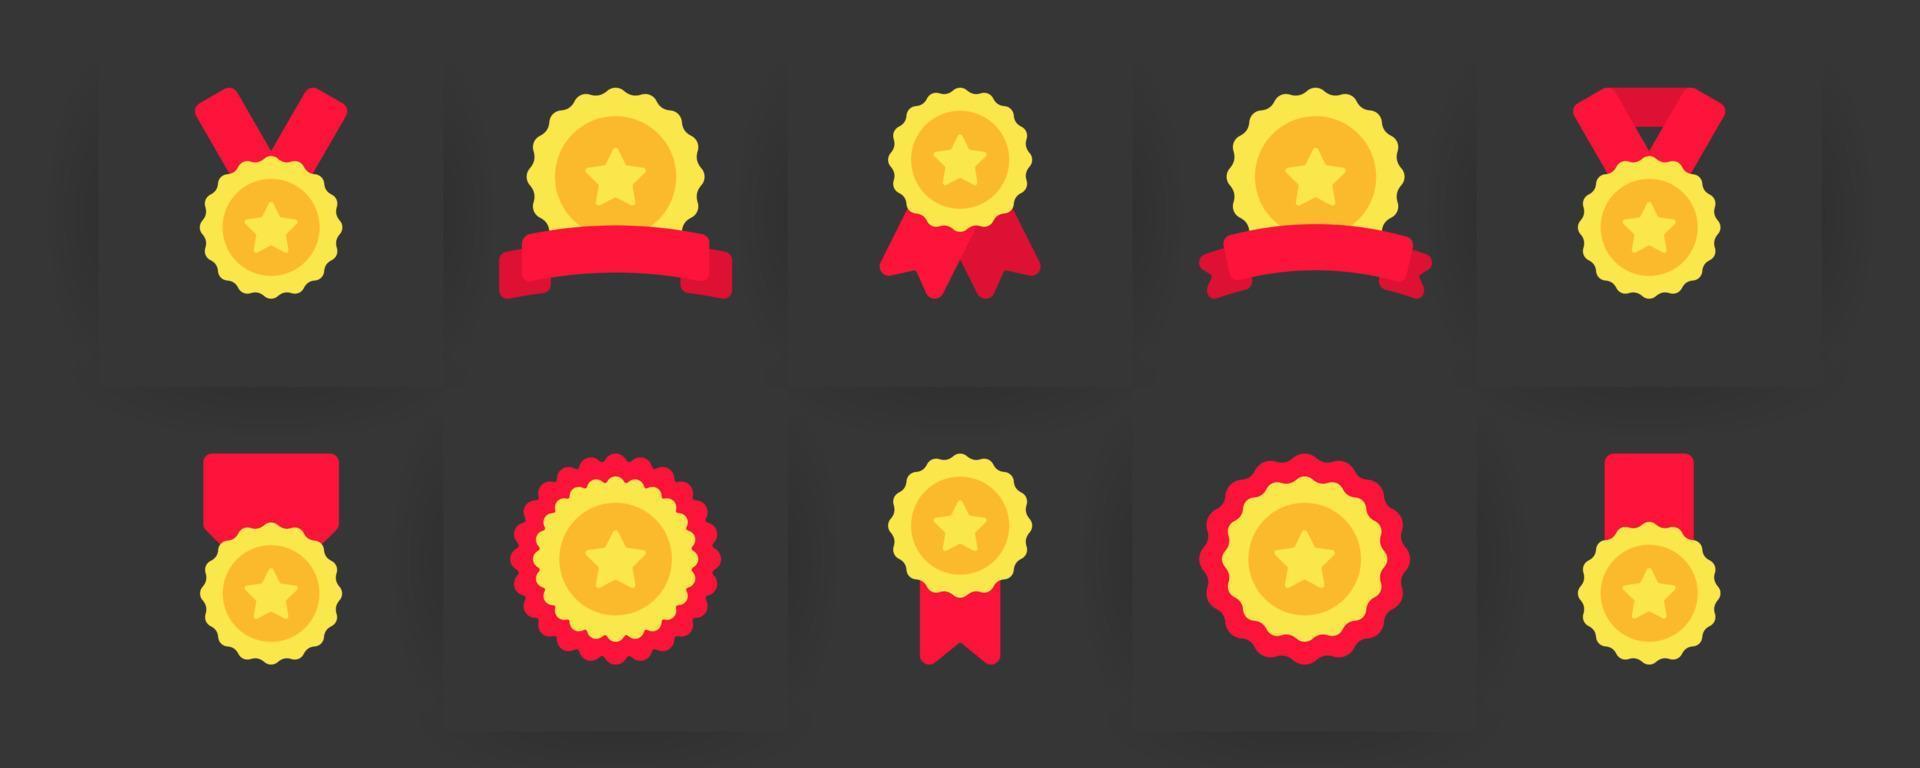 Collection of Black Medals with Ribbon and Stars for Winner of Championship. Silhouette Rewards Set on White Background. Round Awards for Sport Competition. Isolated Vector Illustration.